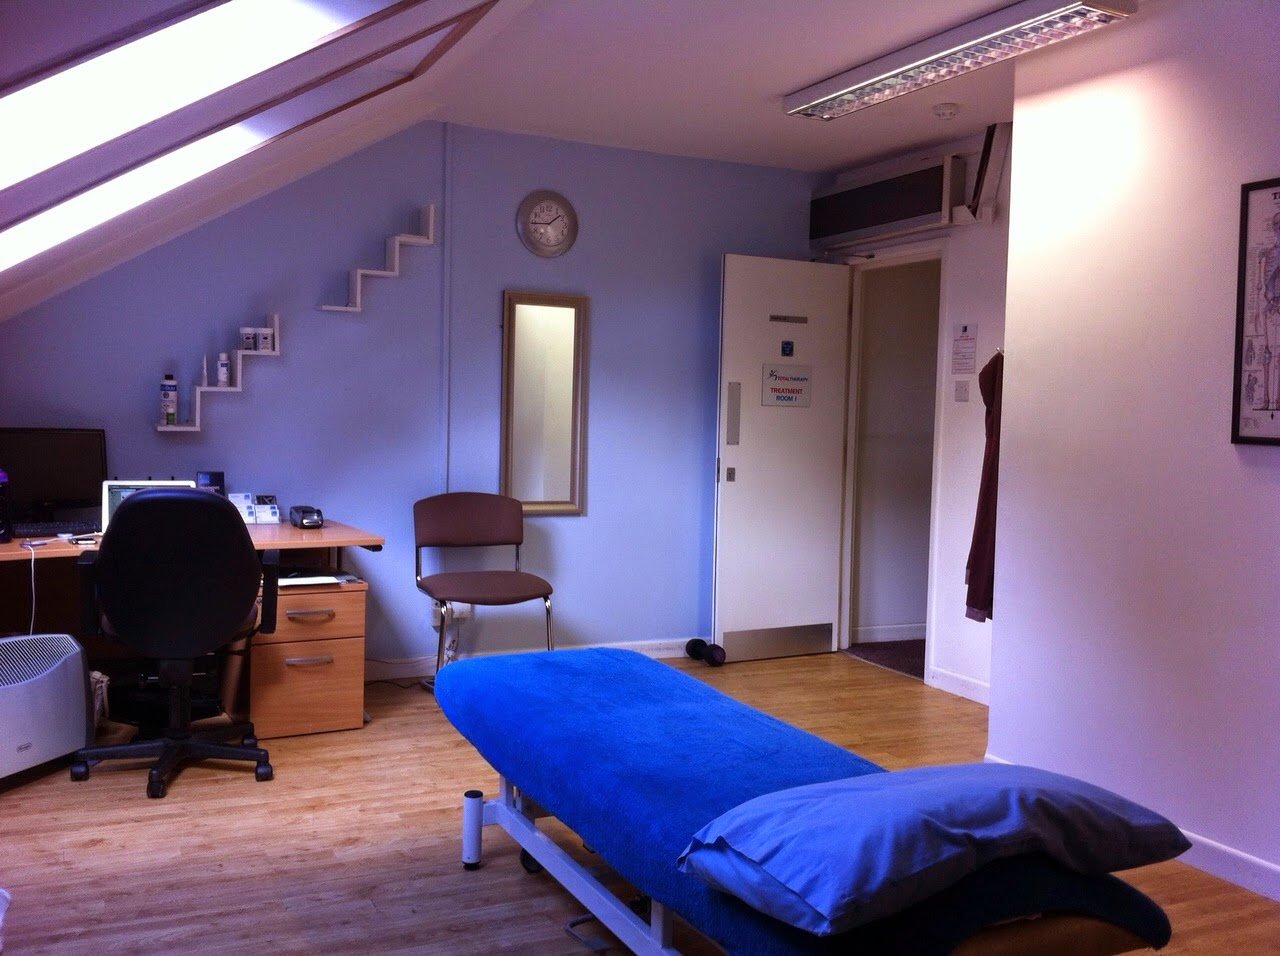 Total Therapy Bournemouth Chiropractic And Physiotherapy Clinic Bh2 6lh The Club At Meyrick